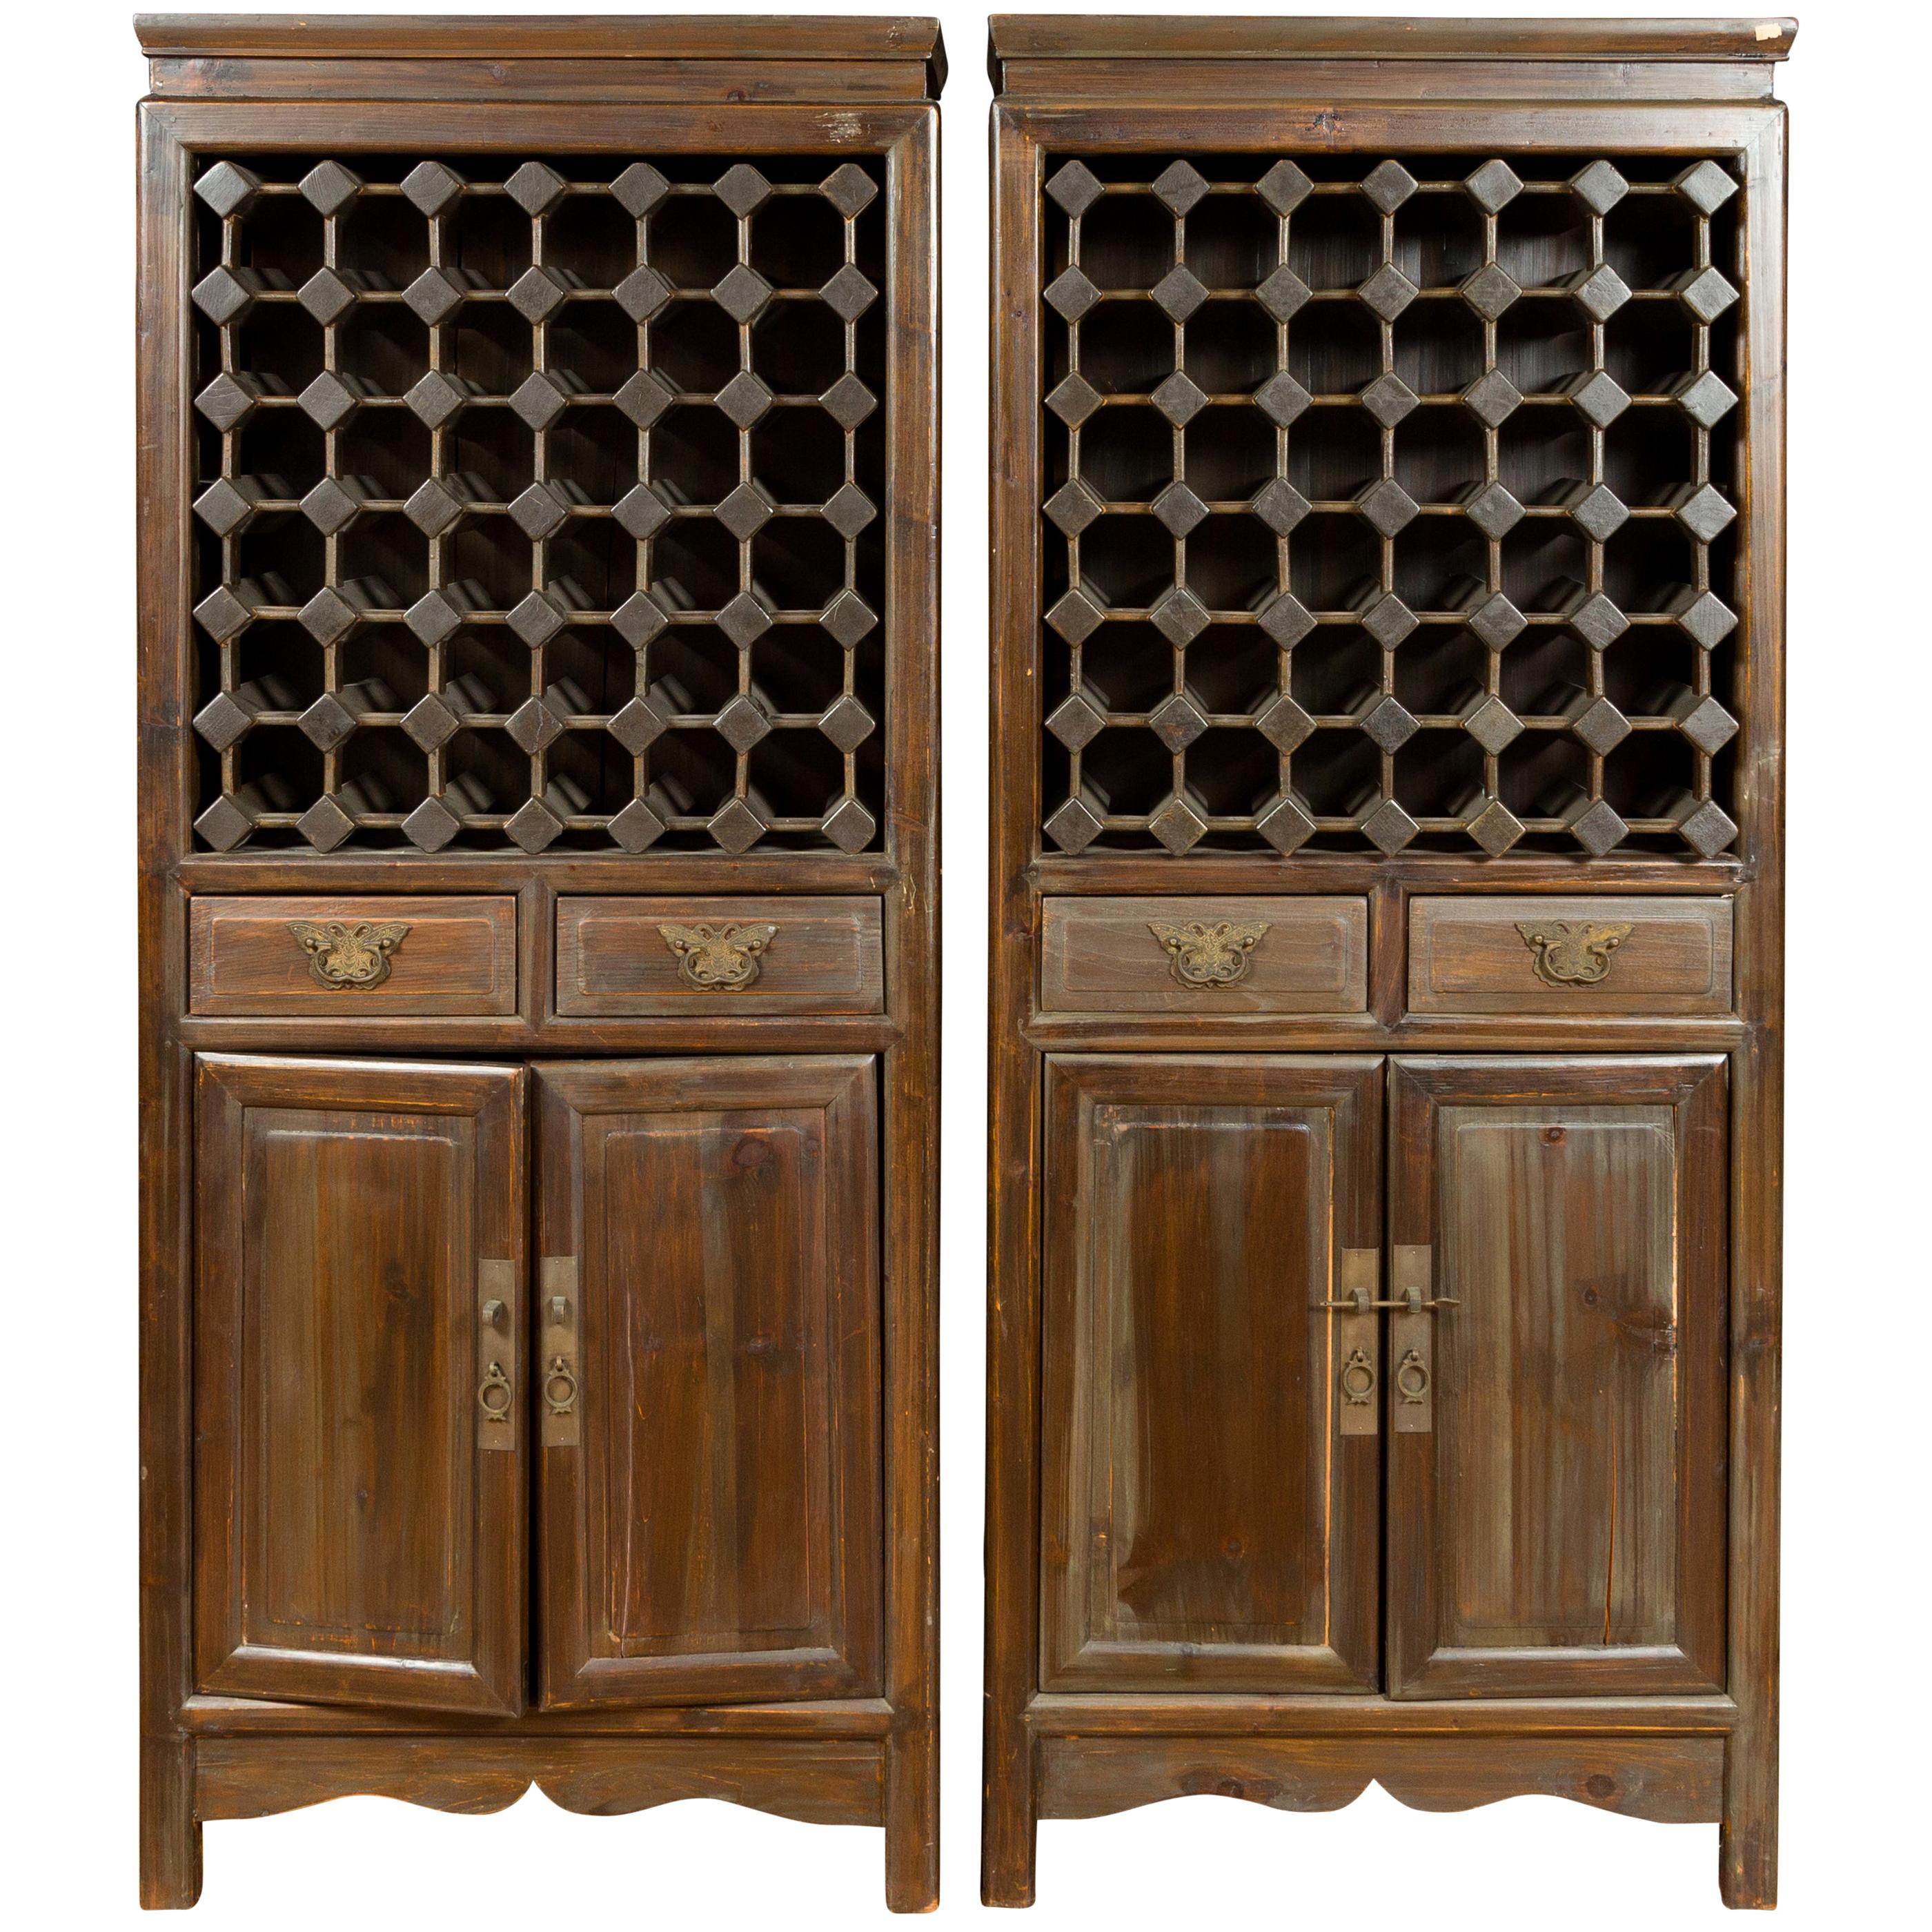 Pair of Chinese Vintage Brown Wood Cabinets with Partitioned Removable Shelves